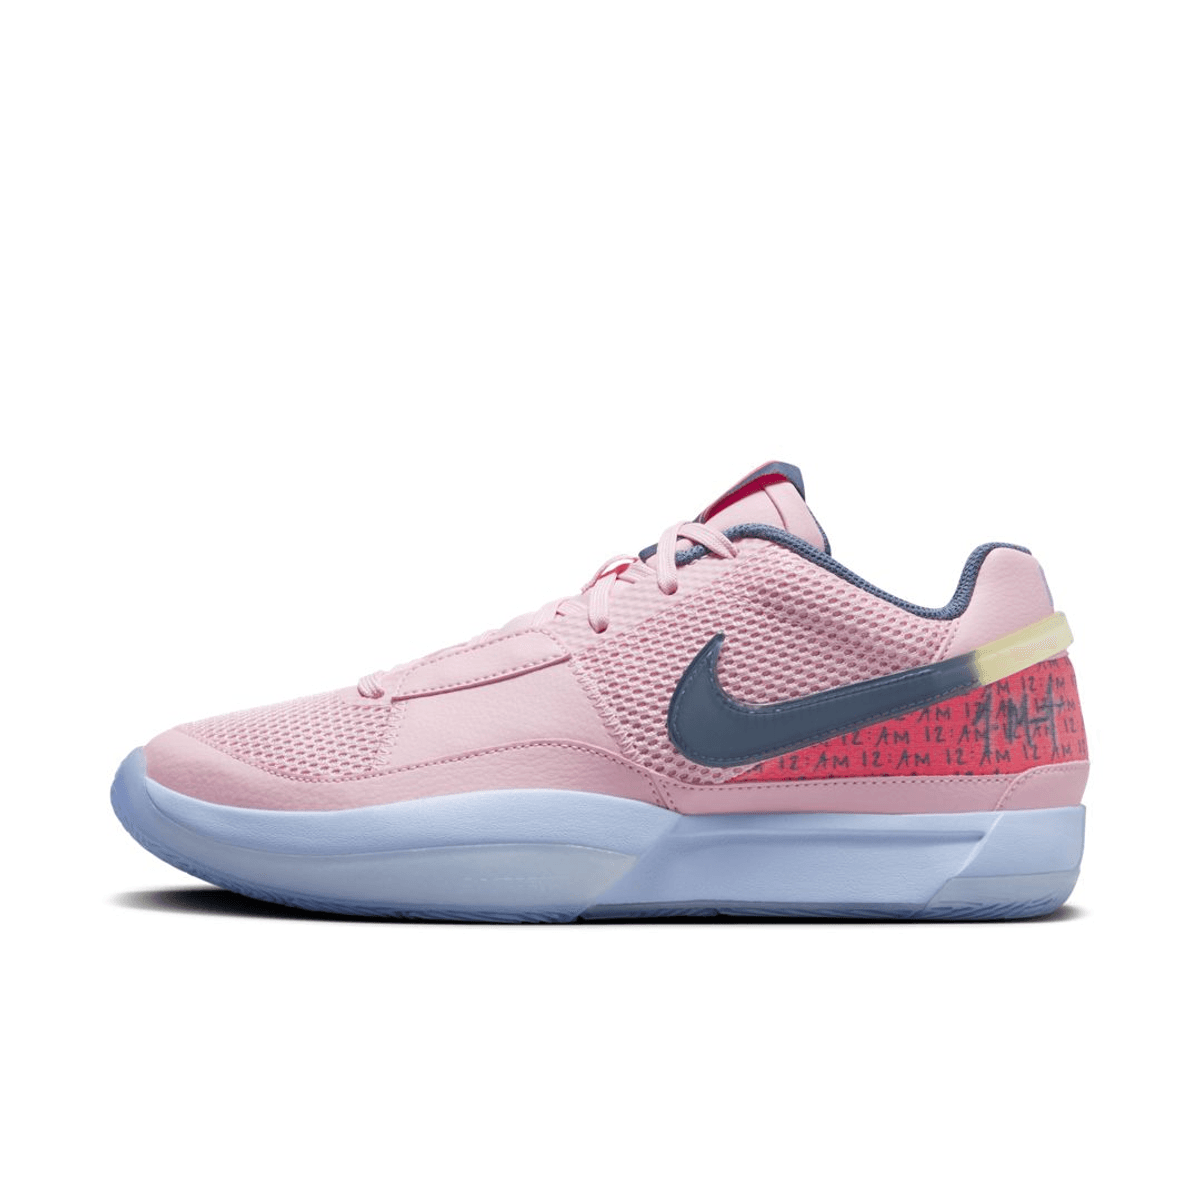 Official Images Of The Nike Ja 1 "Soft Pink"